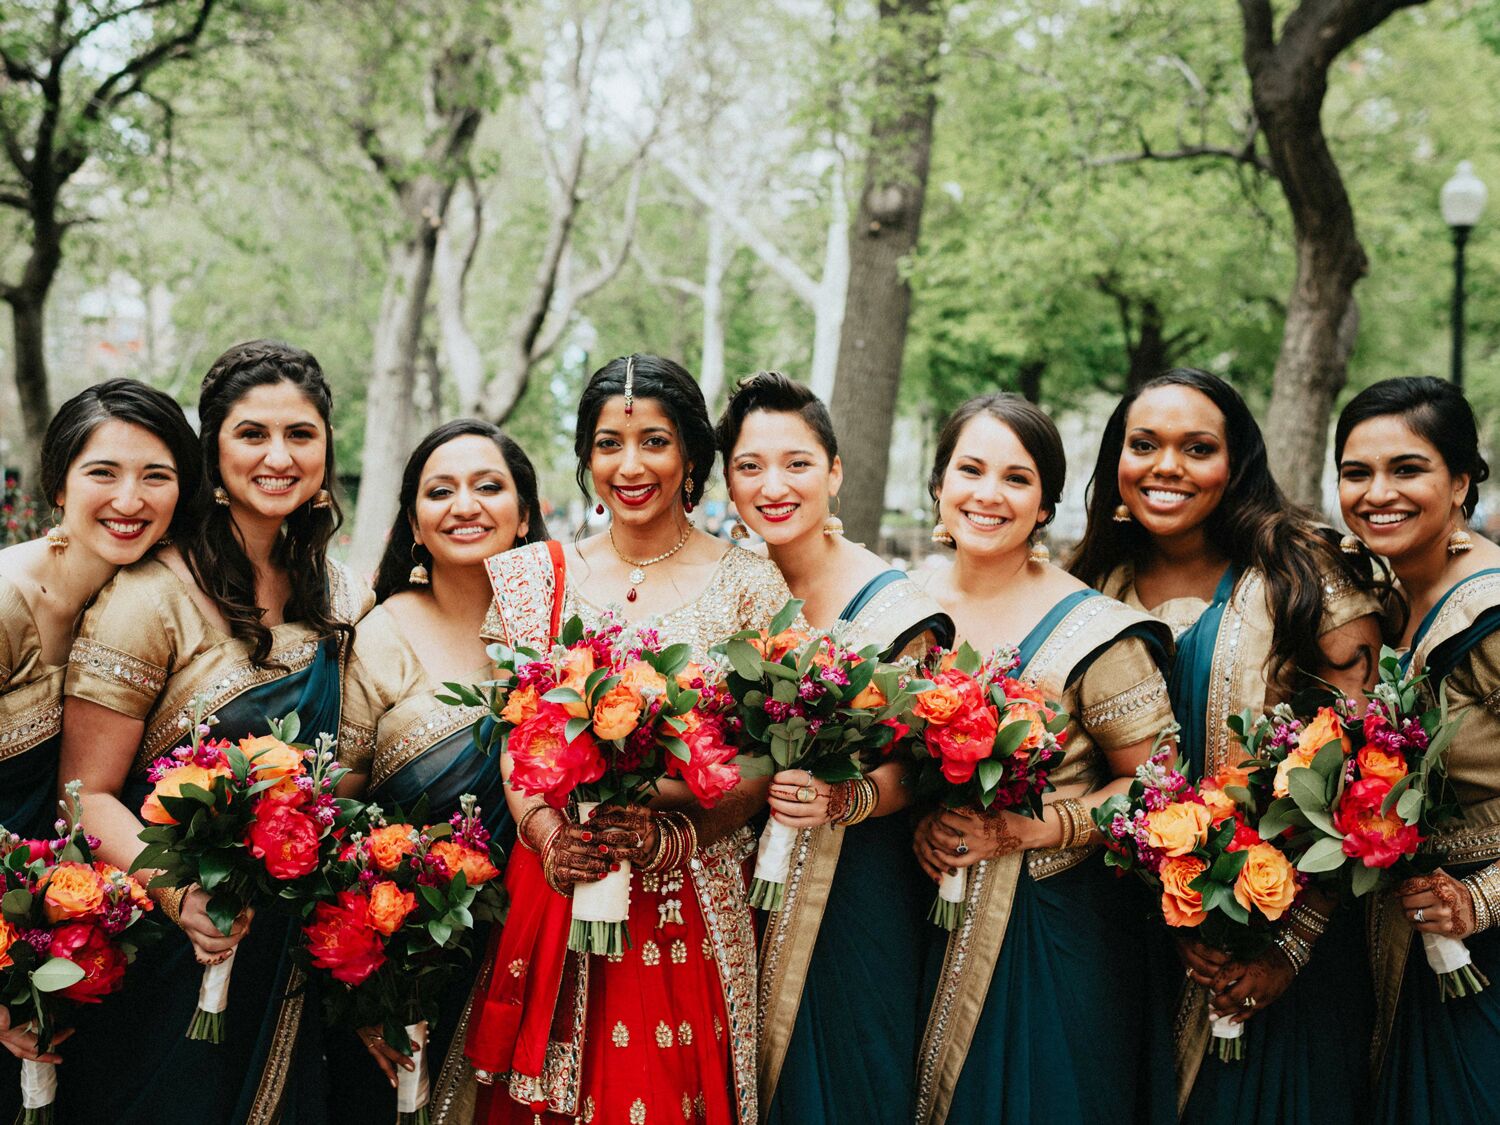 How to Write Your Wedding Party Bios: Wording Tips and Examples